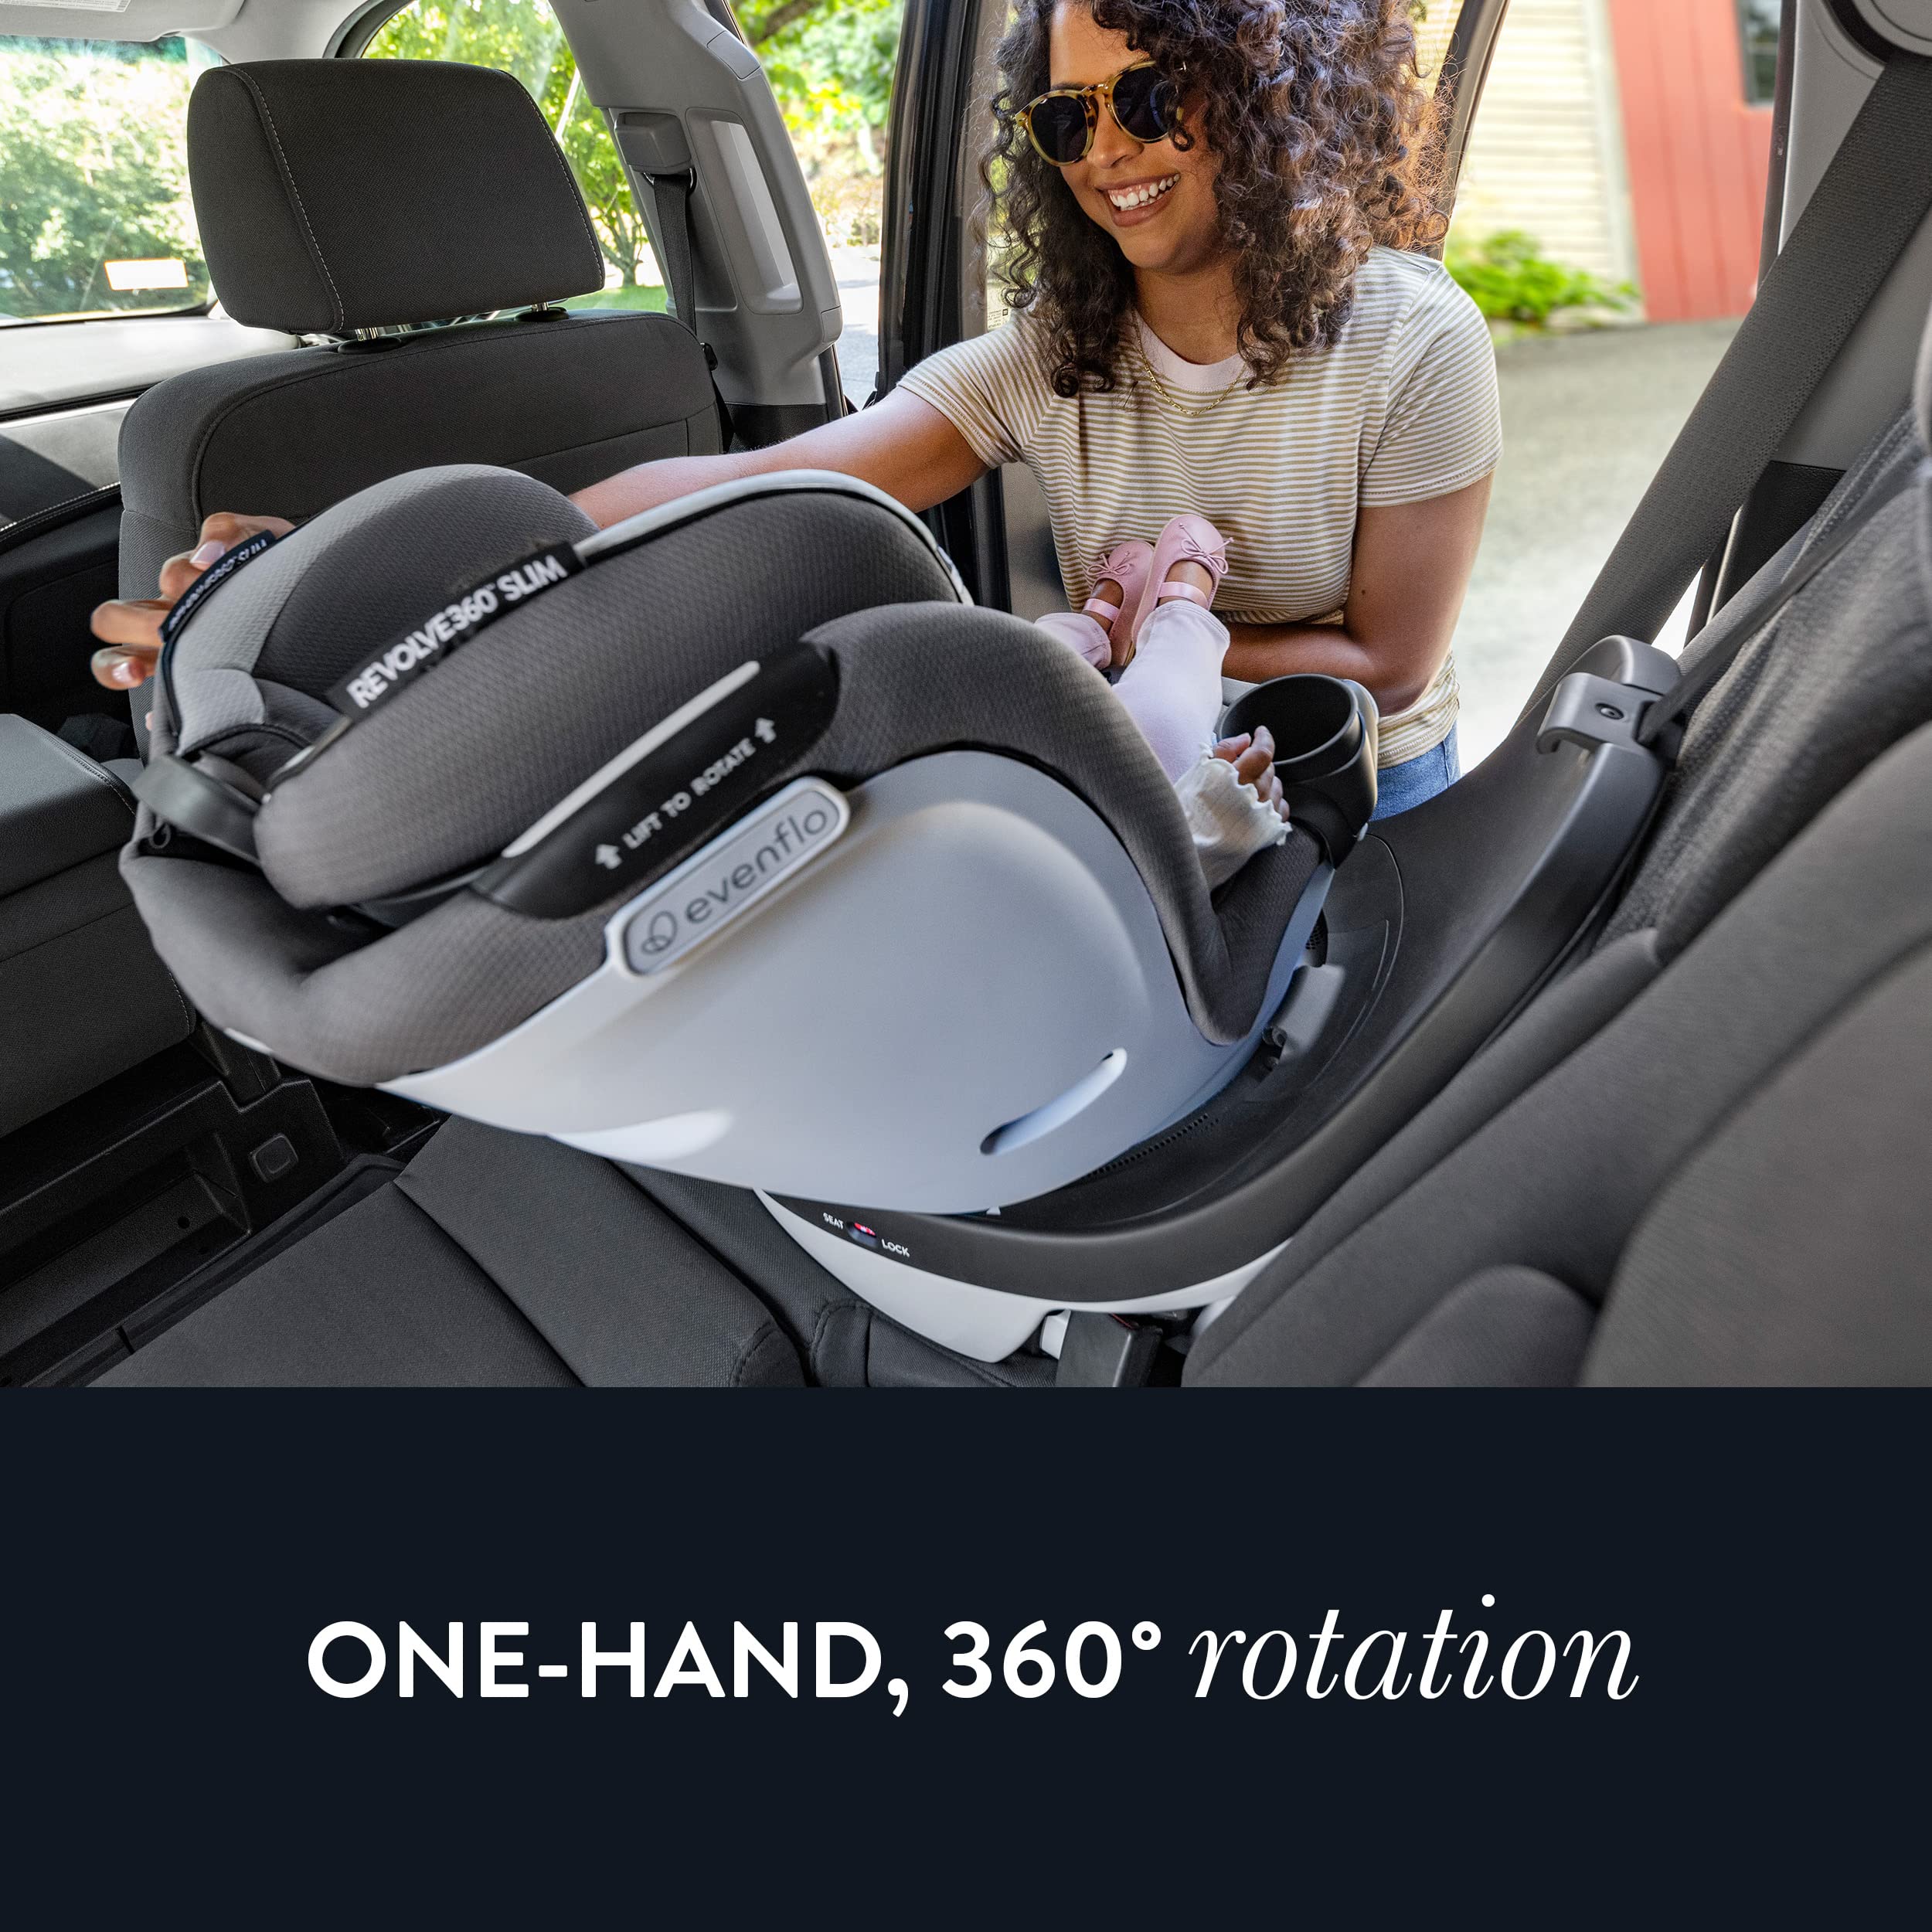 Evenflo Gold Revolve360 Slim 2-in-1 Rotational Car Seat with SensorSafe (Pearl Gray)